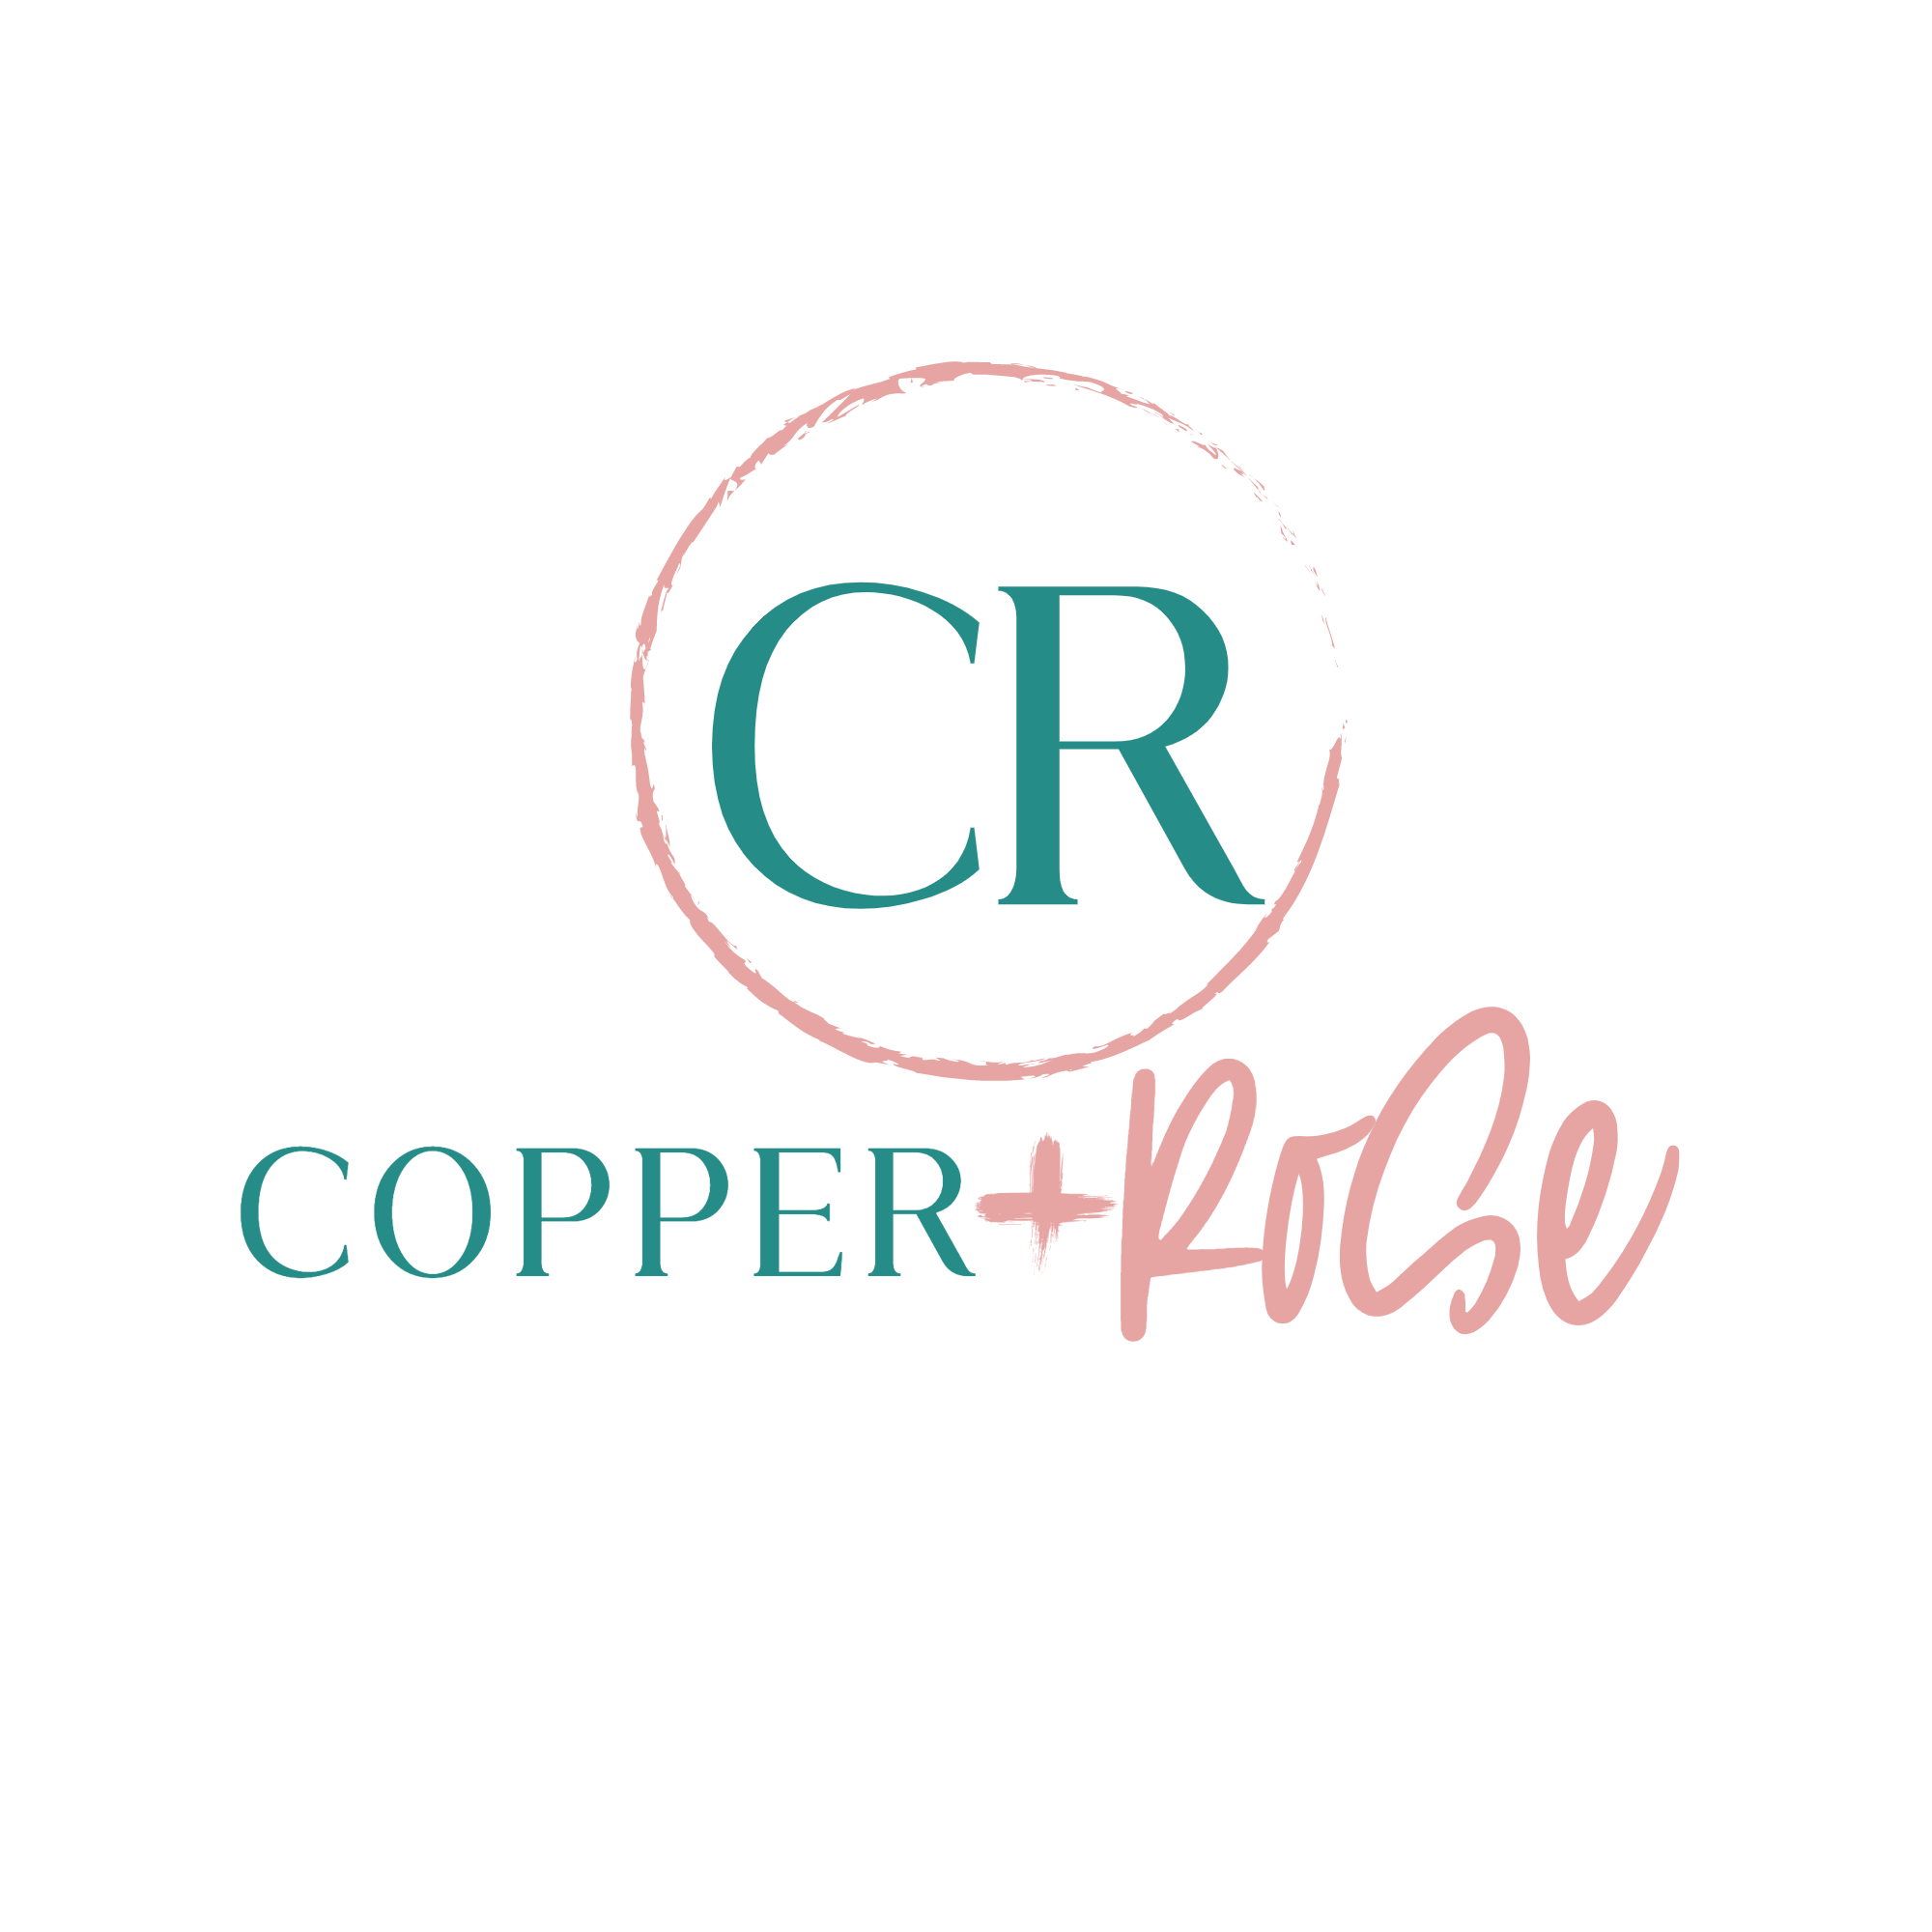 New Copper – Rose + Releases